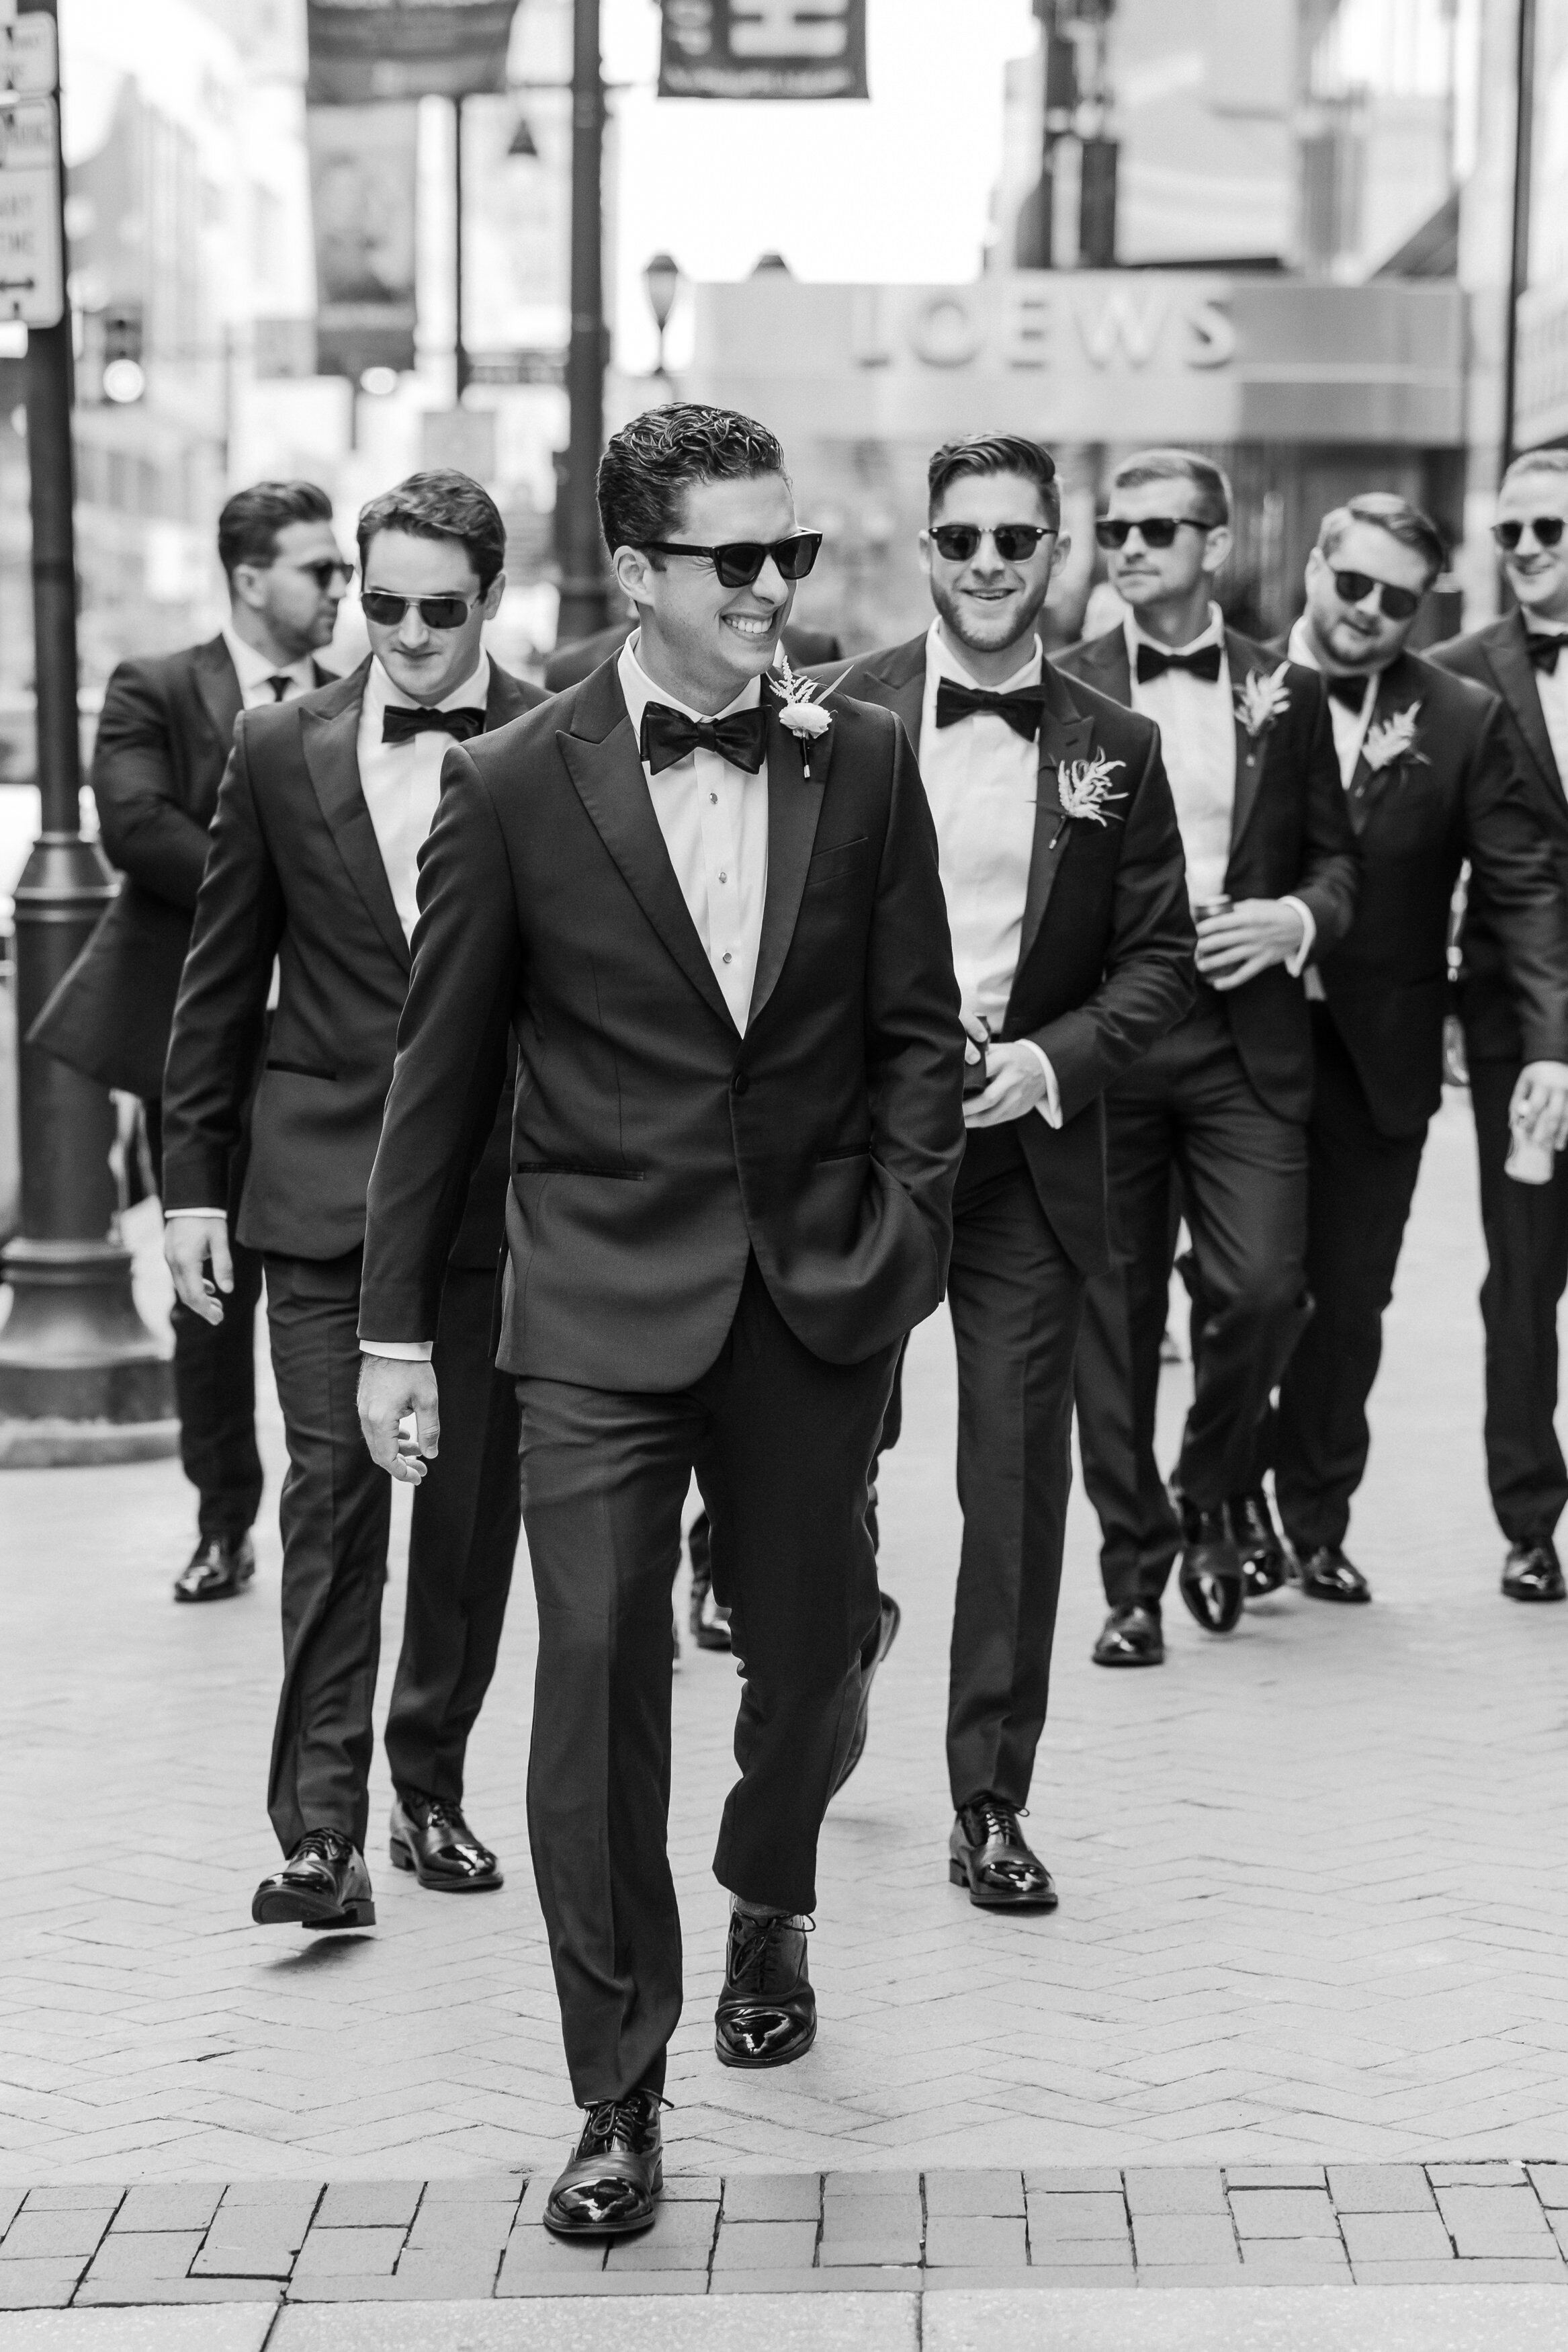 Groom along with his groomsmen in black tuxes and black sunglasses are walking down the street from the Loews Hotel in Philadelphia